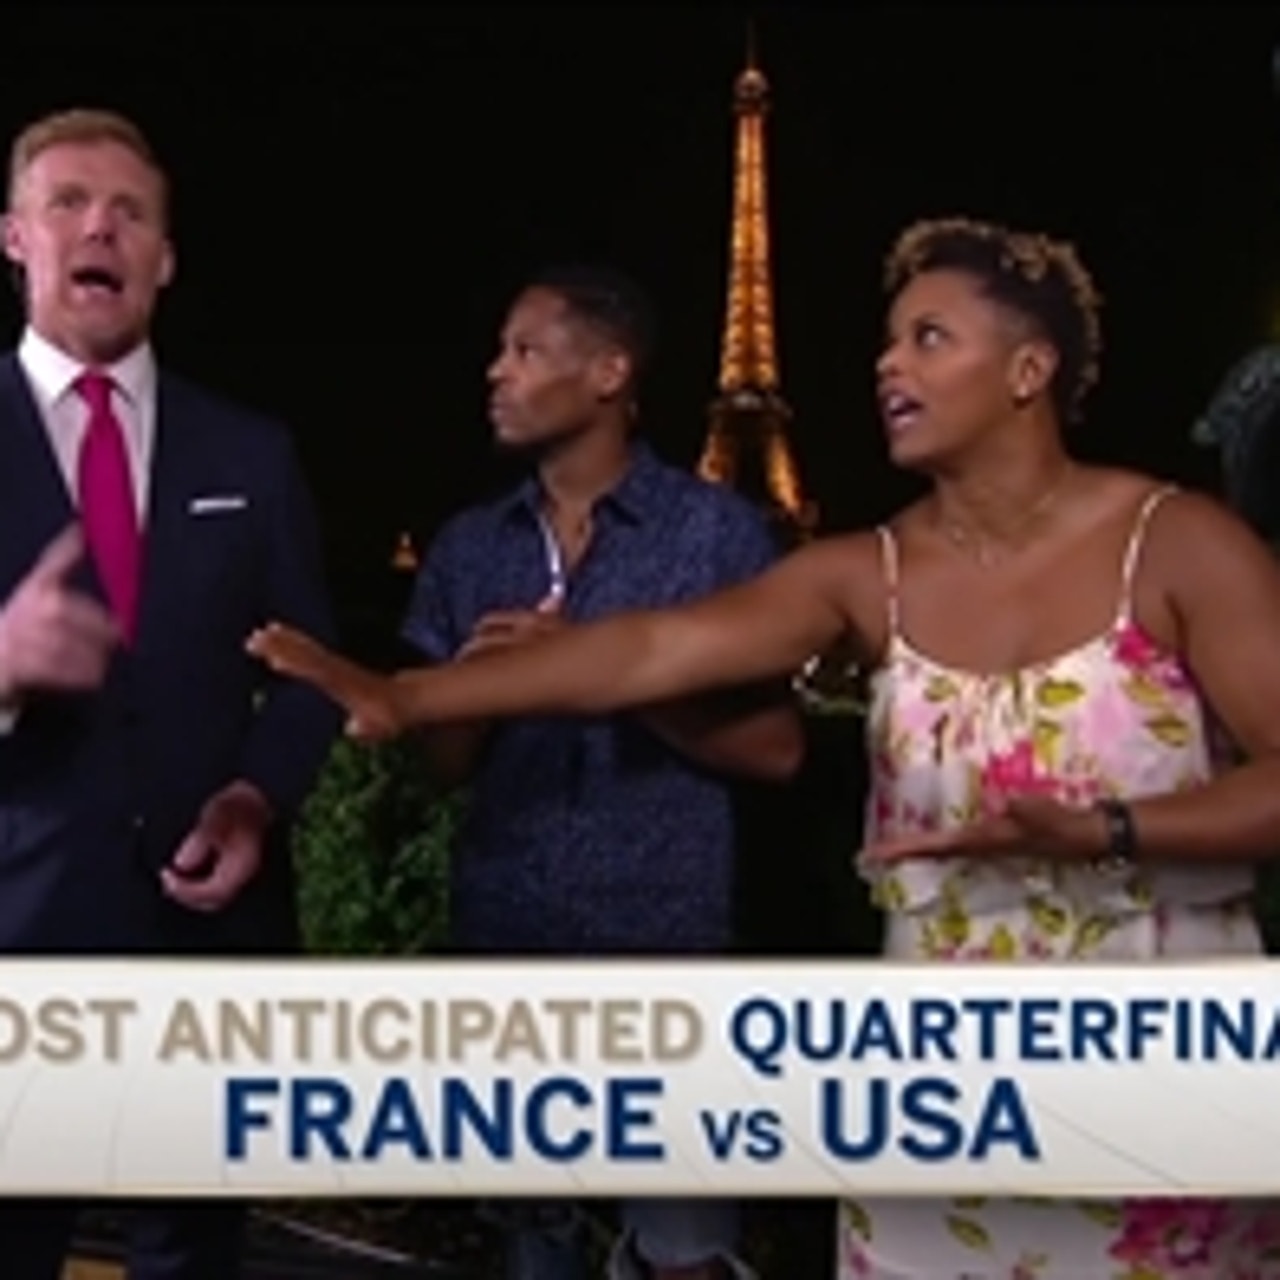 Alexi Lalas: 'If the U.S. beats France, I will pose in a wedding